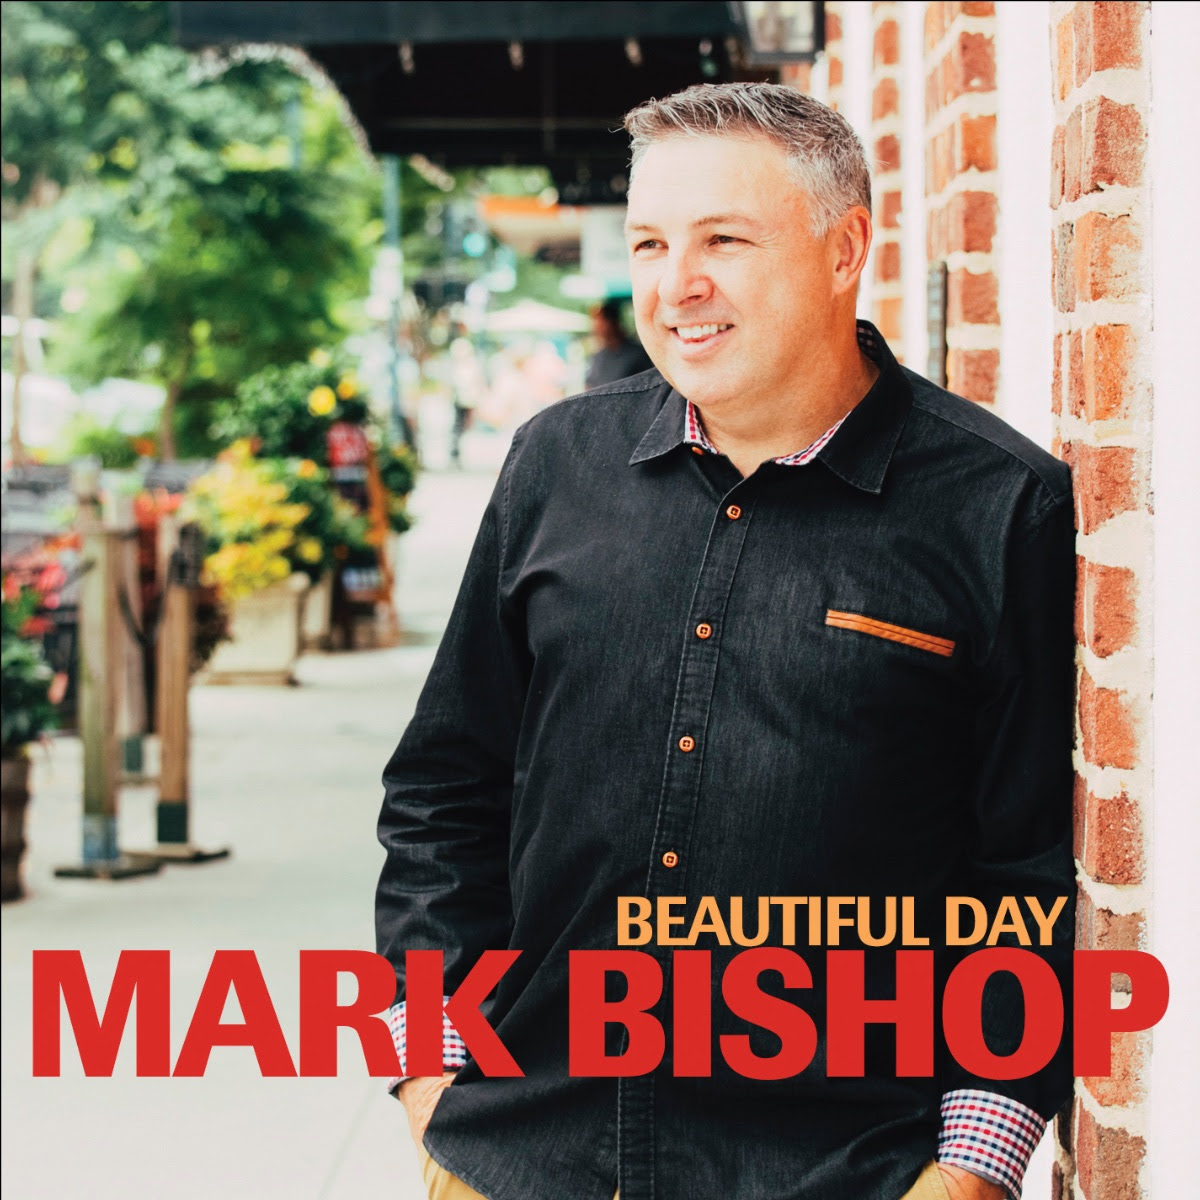 Mark Bishop releases Beautiful Day, a positive album about faith and trust